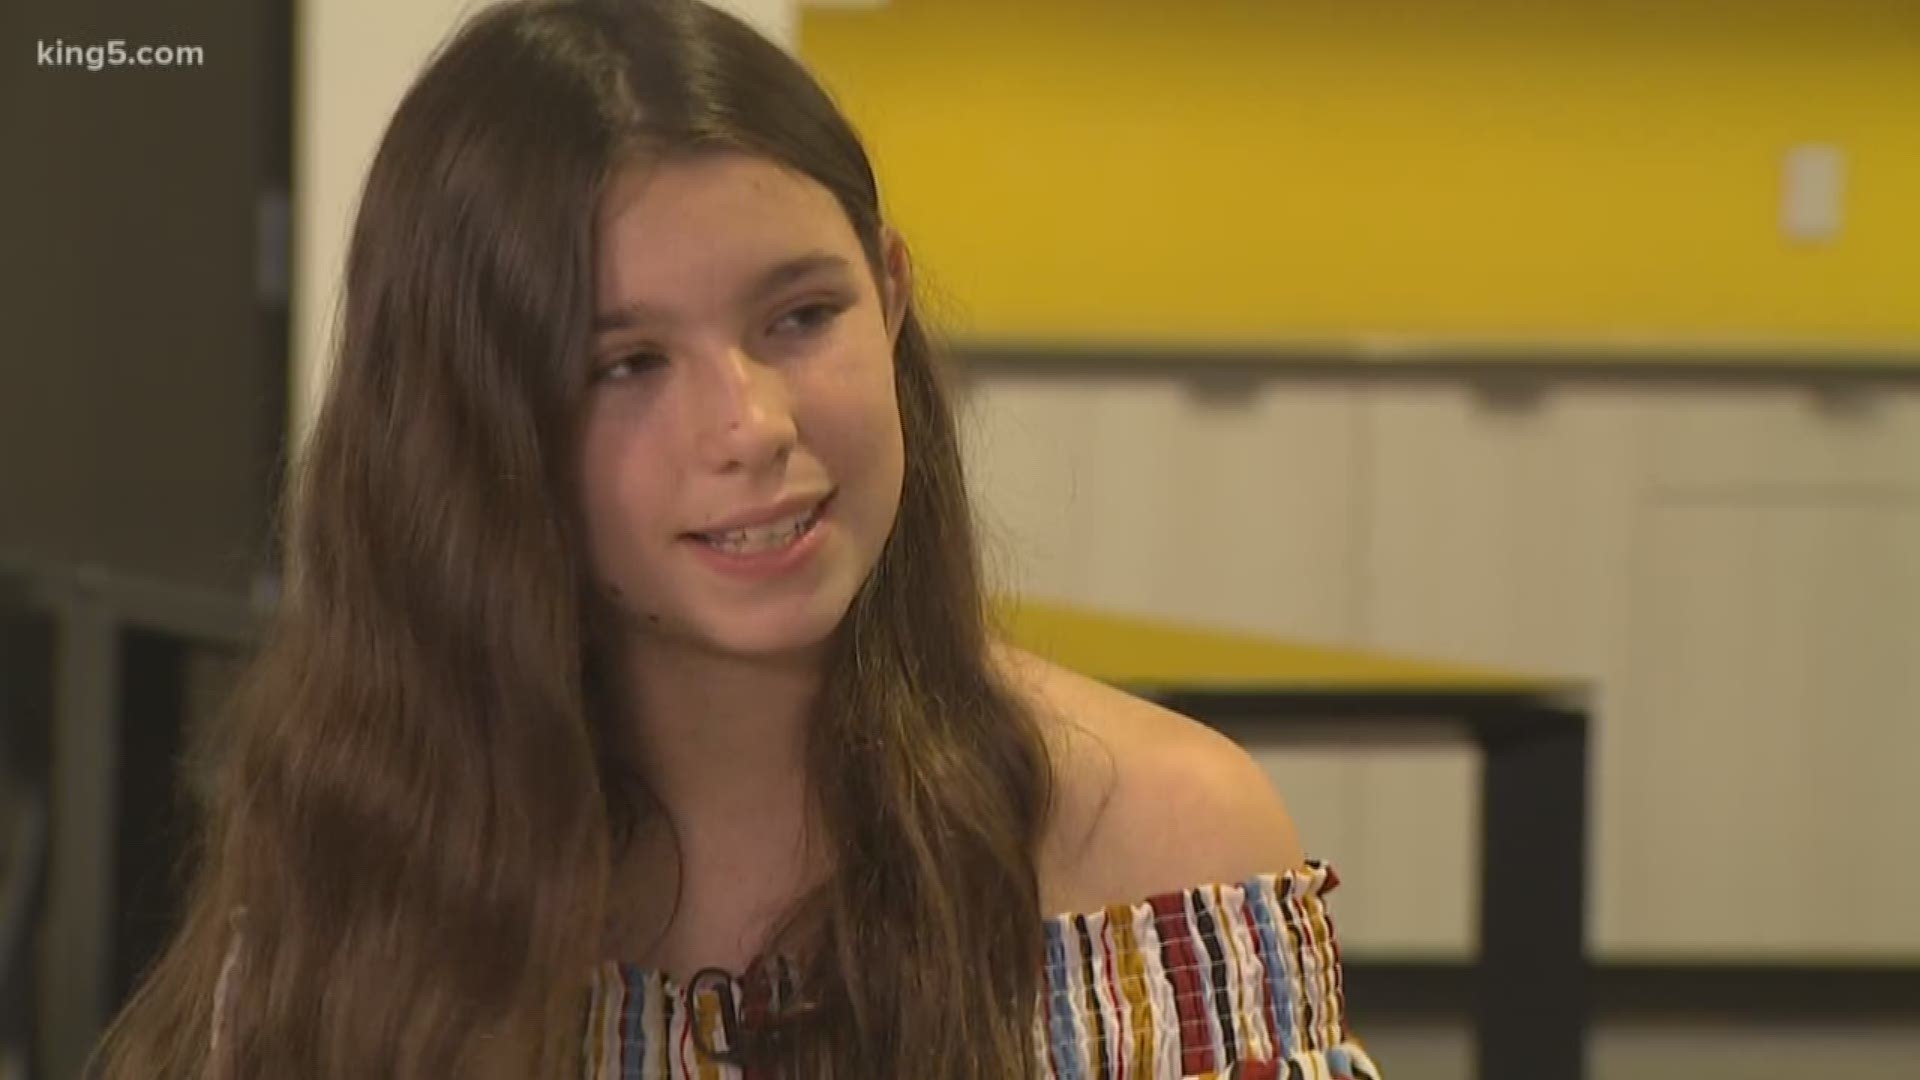 Josie is a 12-year-old philanthropist who raises money to build wells in Ghana. Josie recently returned from a trip to see first-hand how those wells have changed lives.